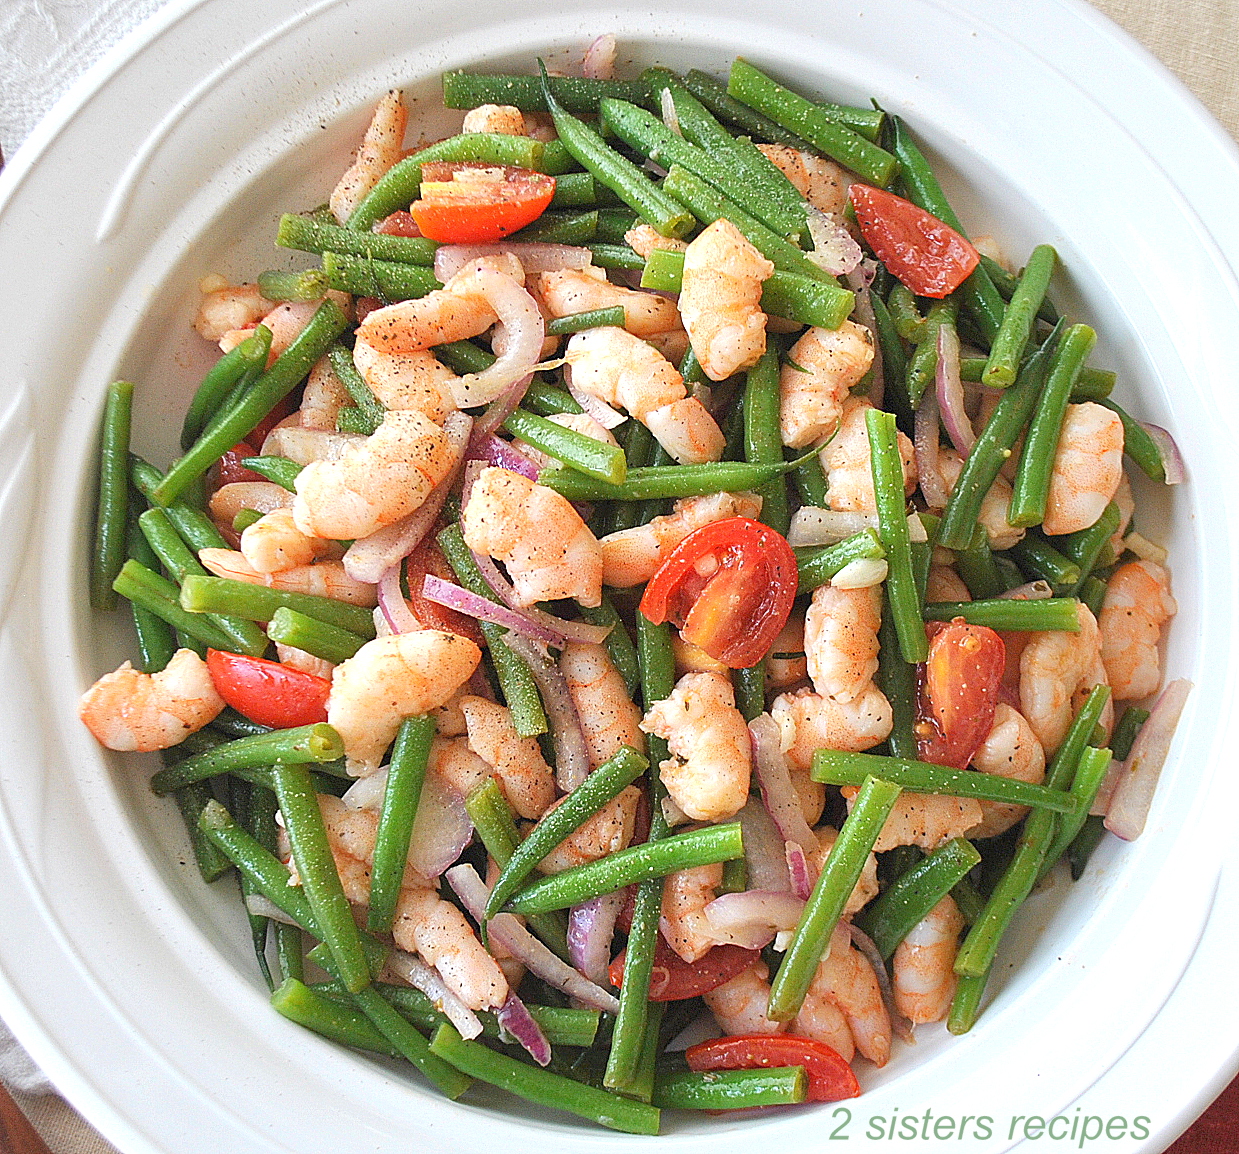 Another barbecue side is our Shrimp Green Bean Salad by 2sistersrecipes.com